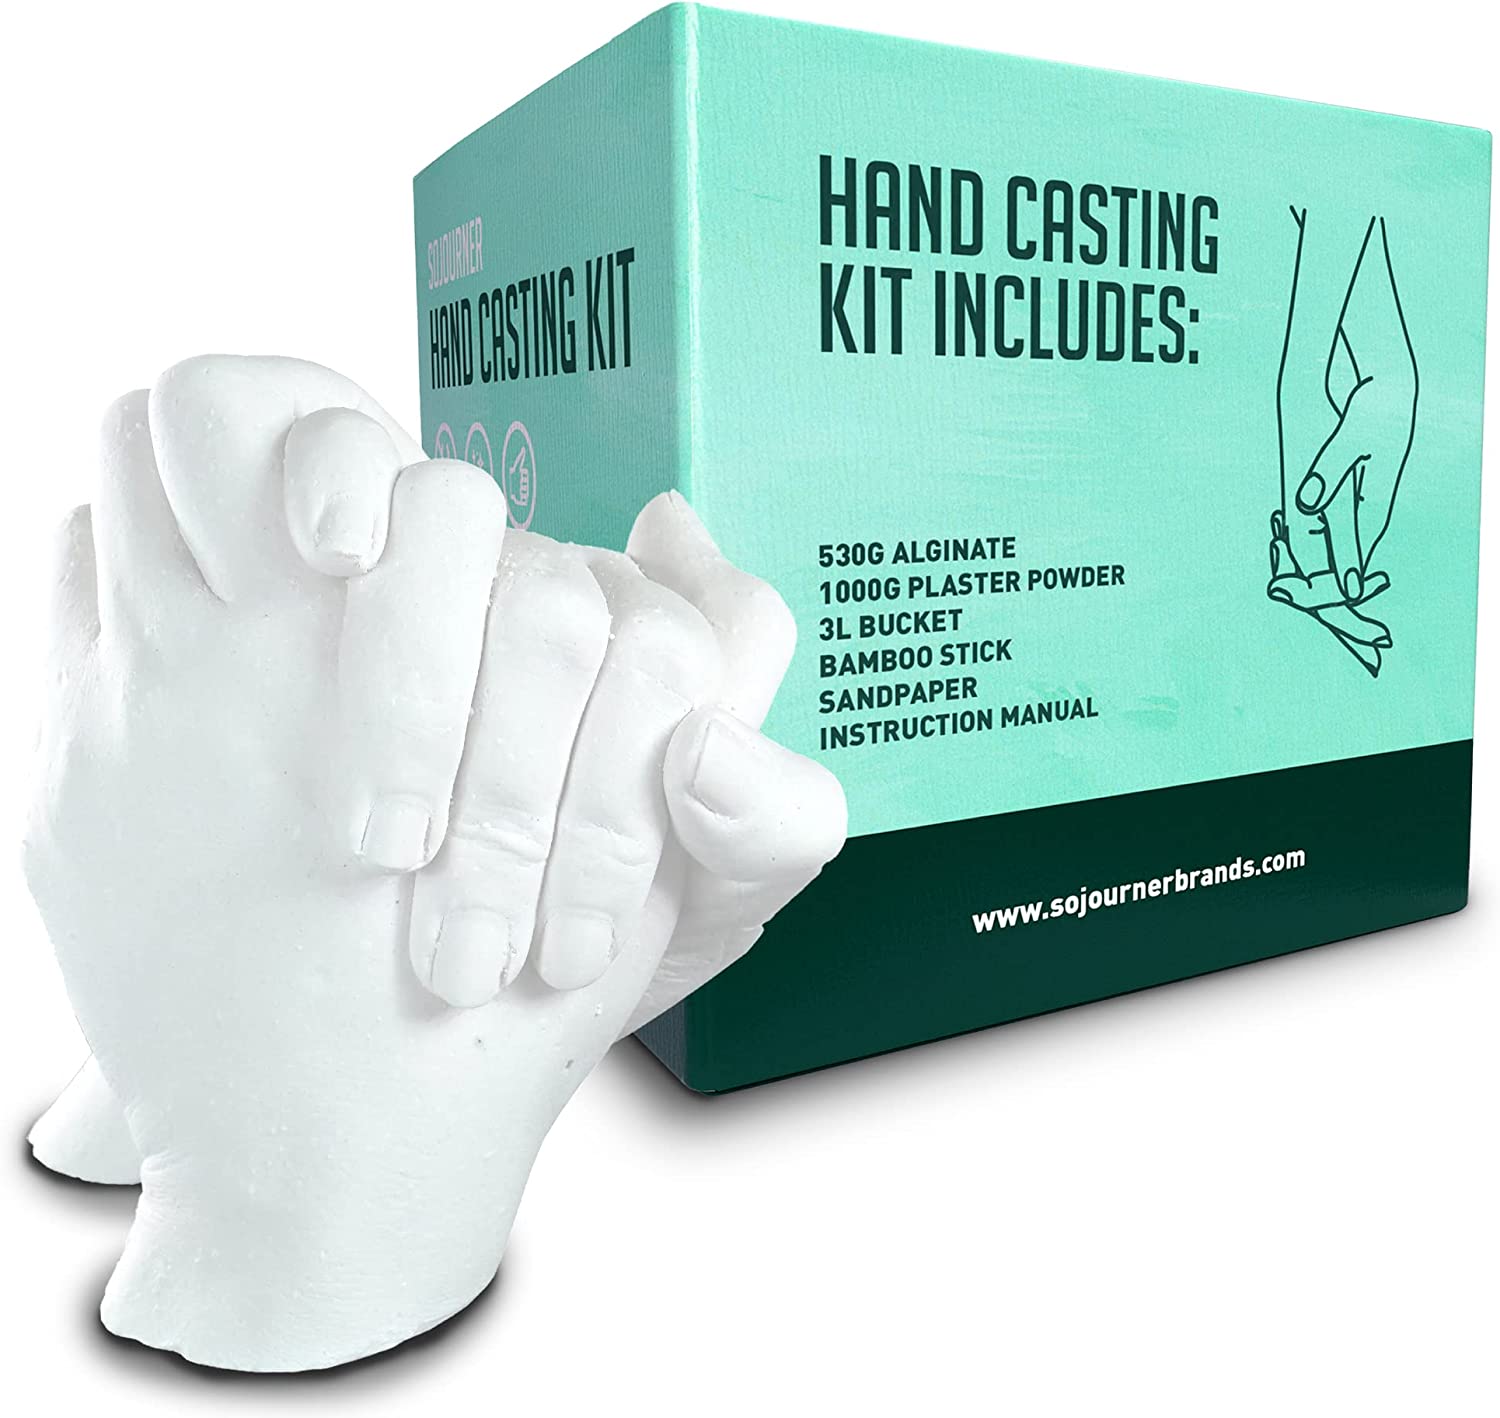 Hand Casting Kit - Perfect Keepsake Gift for Couples, Family & Kids - Hand  Mold Kit for Any Wedding, Anniversary or Holiday - DIY Craft Plaster Kit  for Girlfriend, His, Hers, Wife